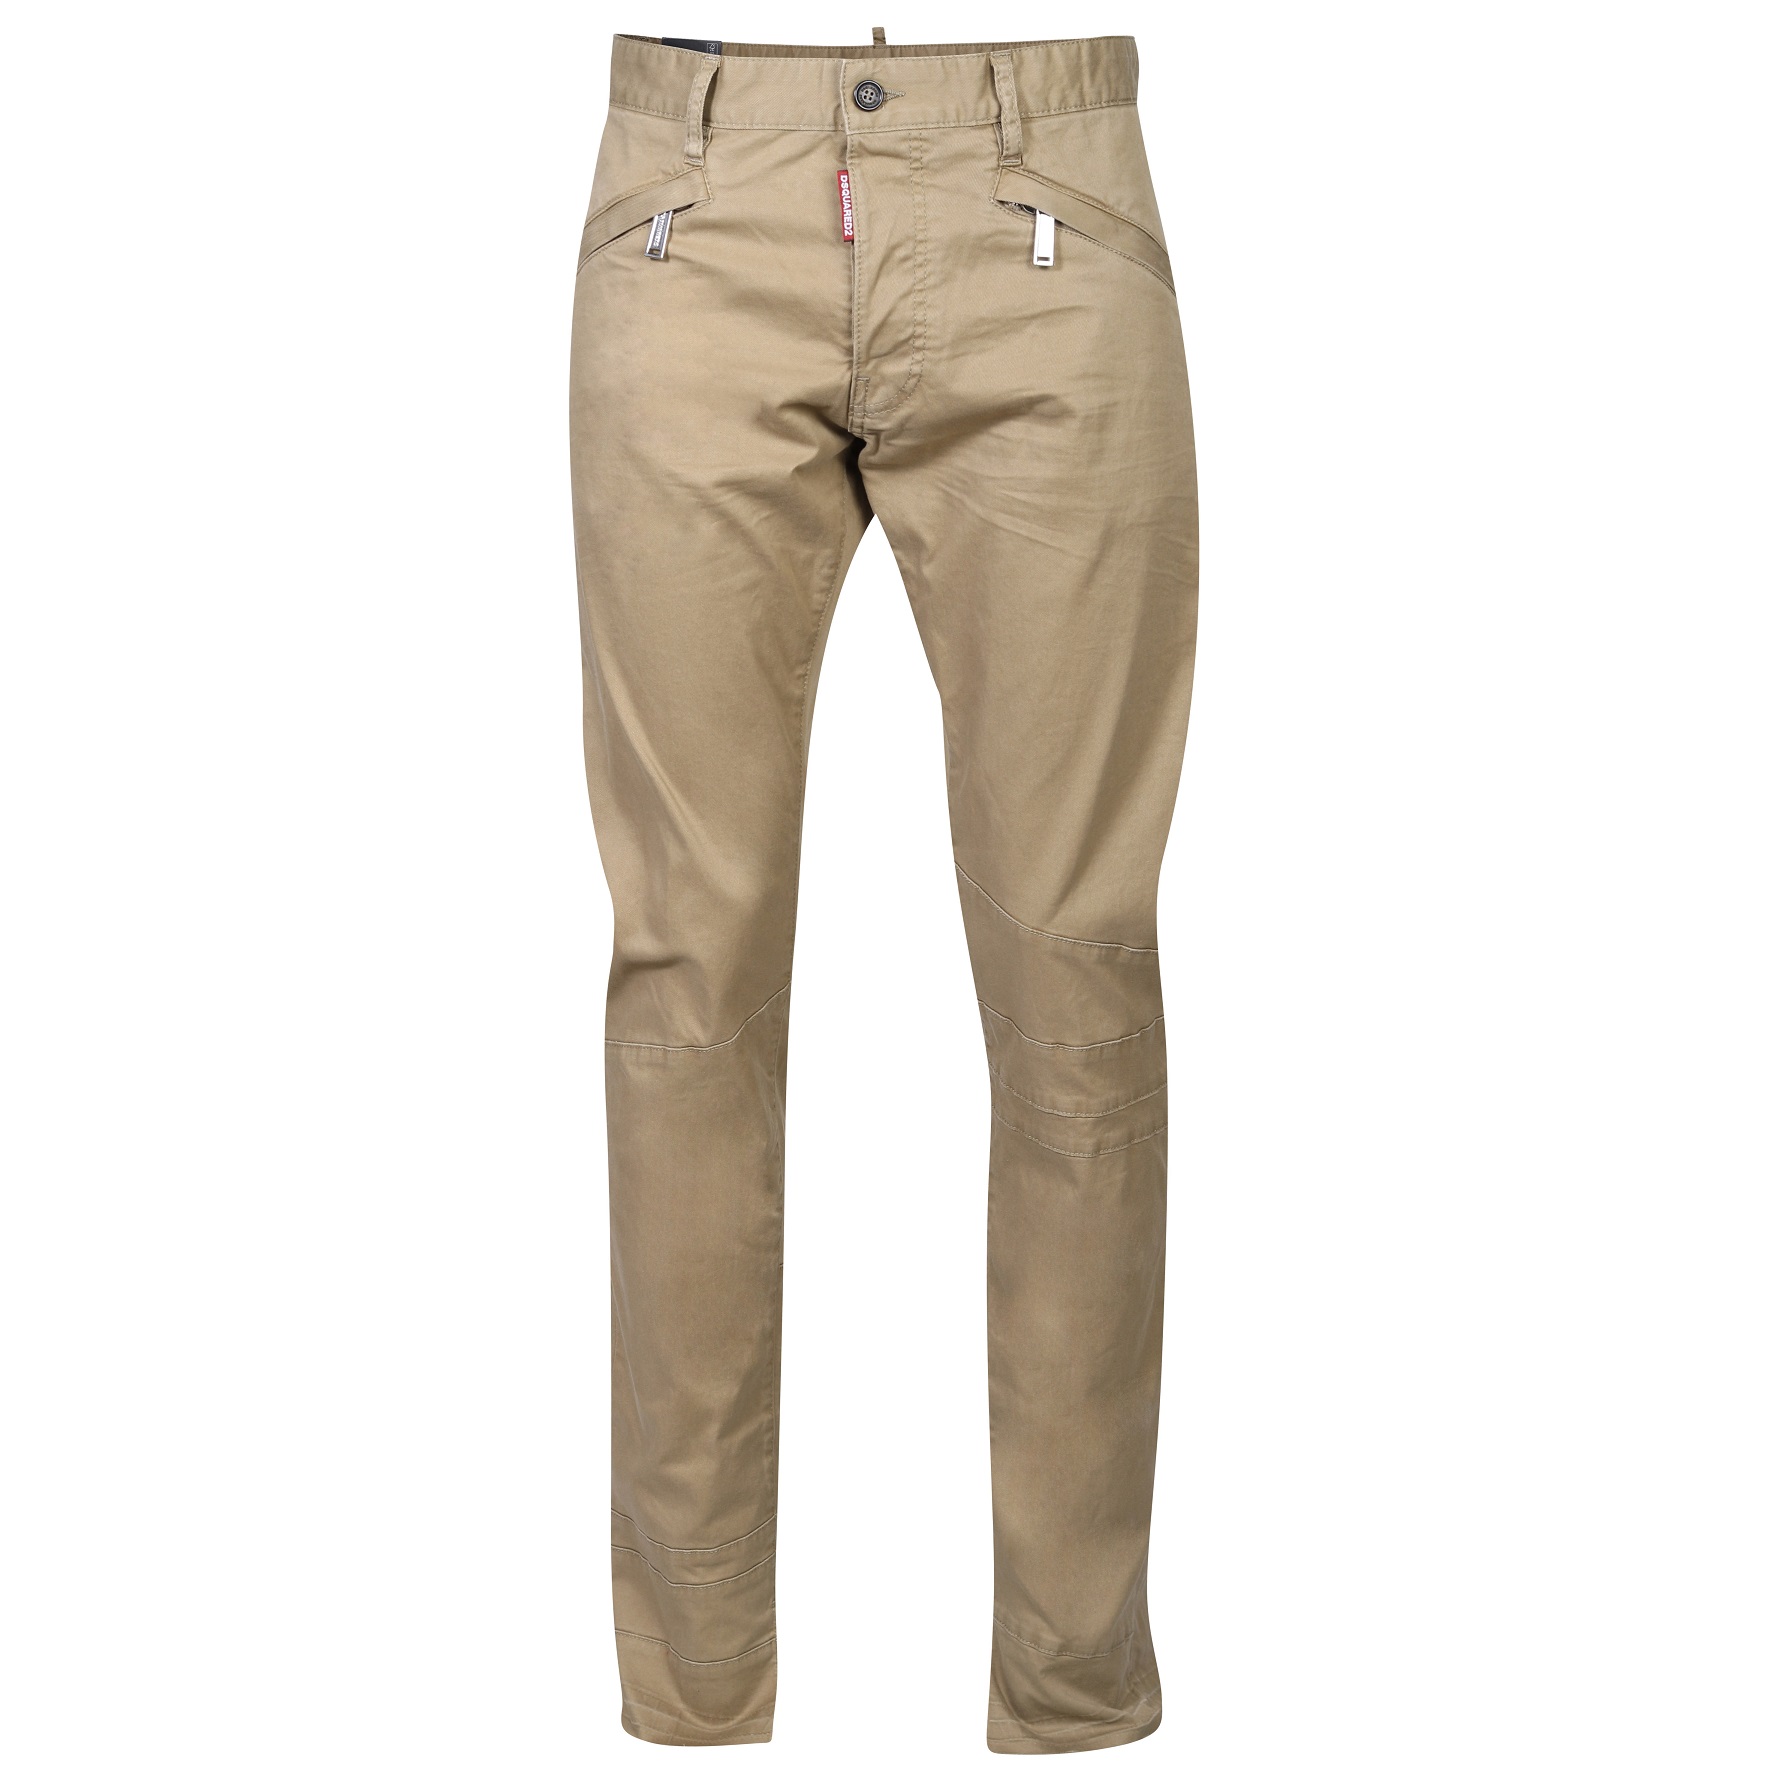 DSQUARED2 Cool Guy Fit Pant in Beige